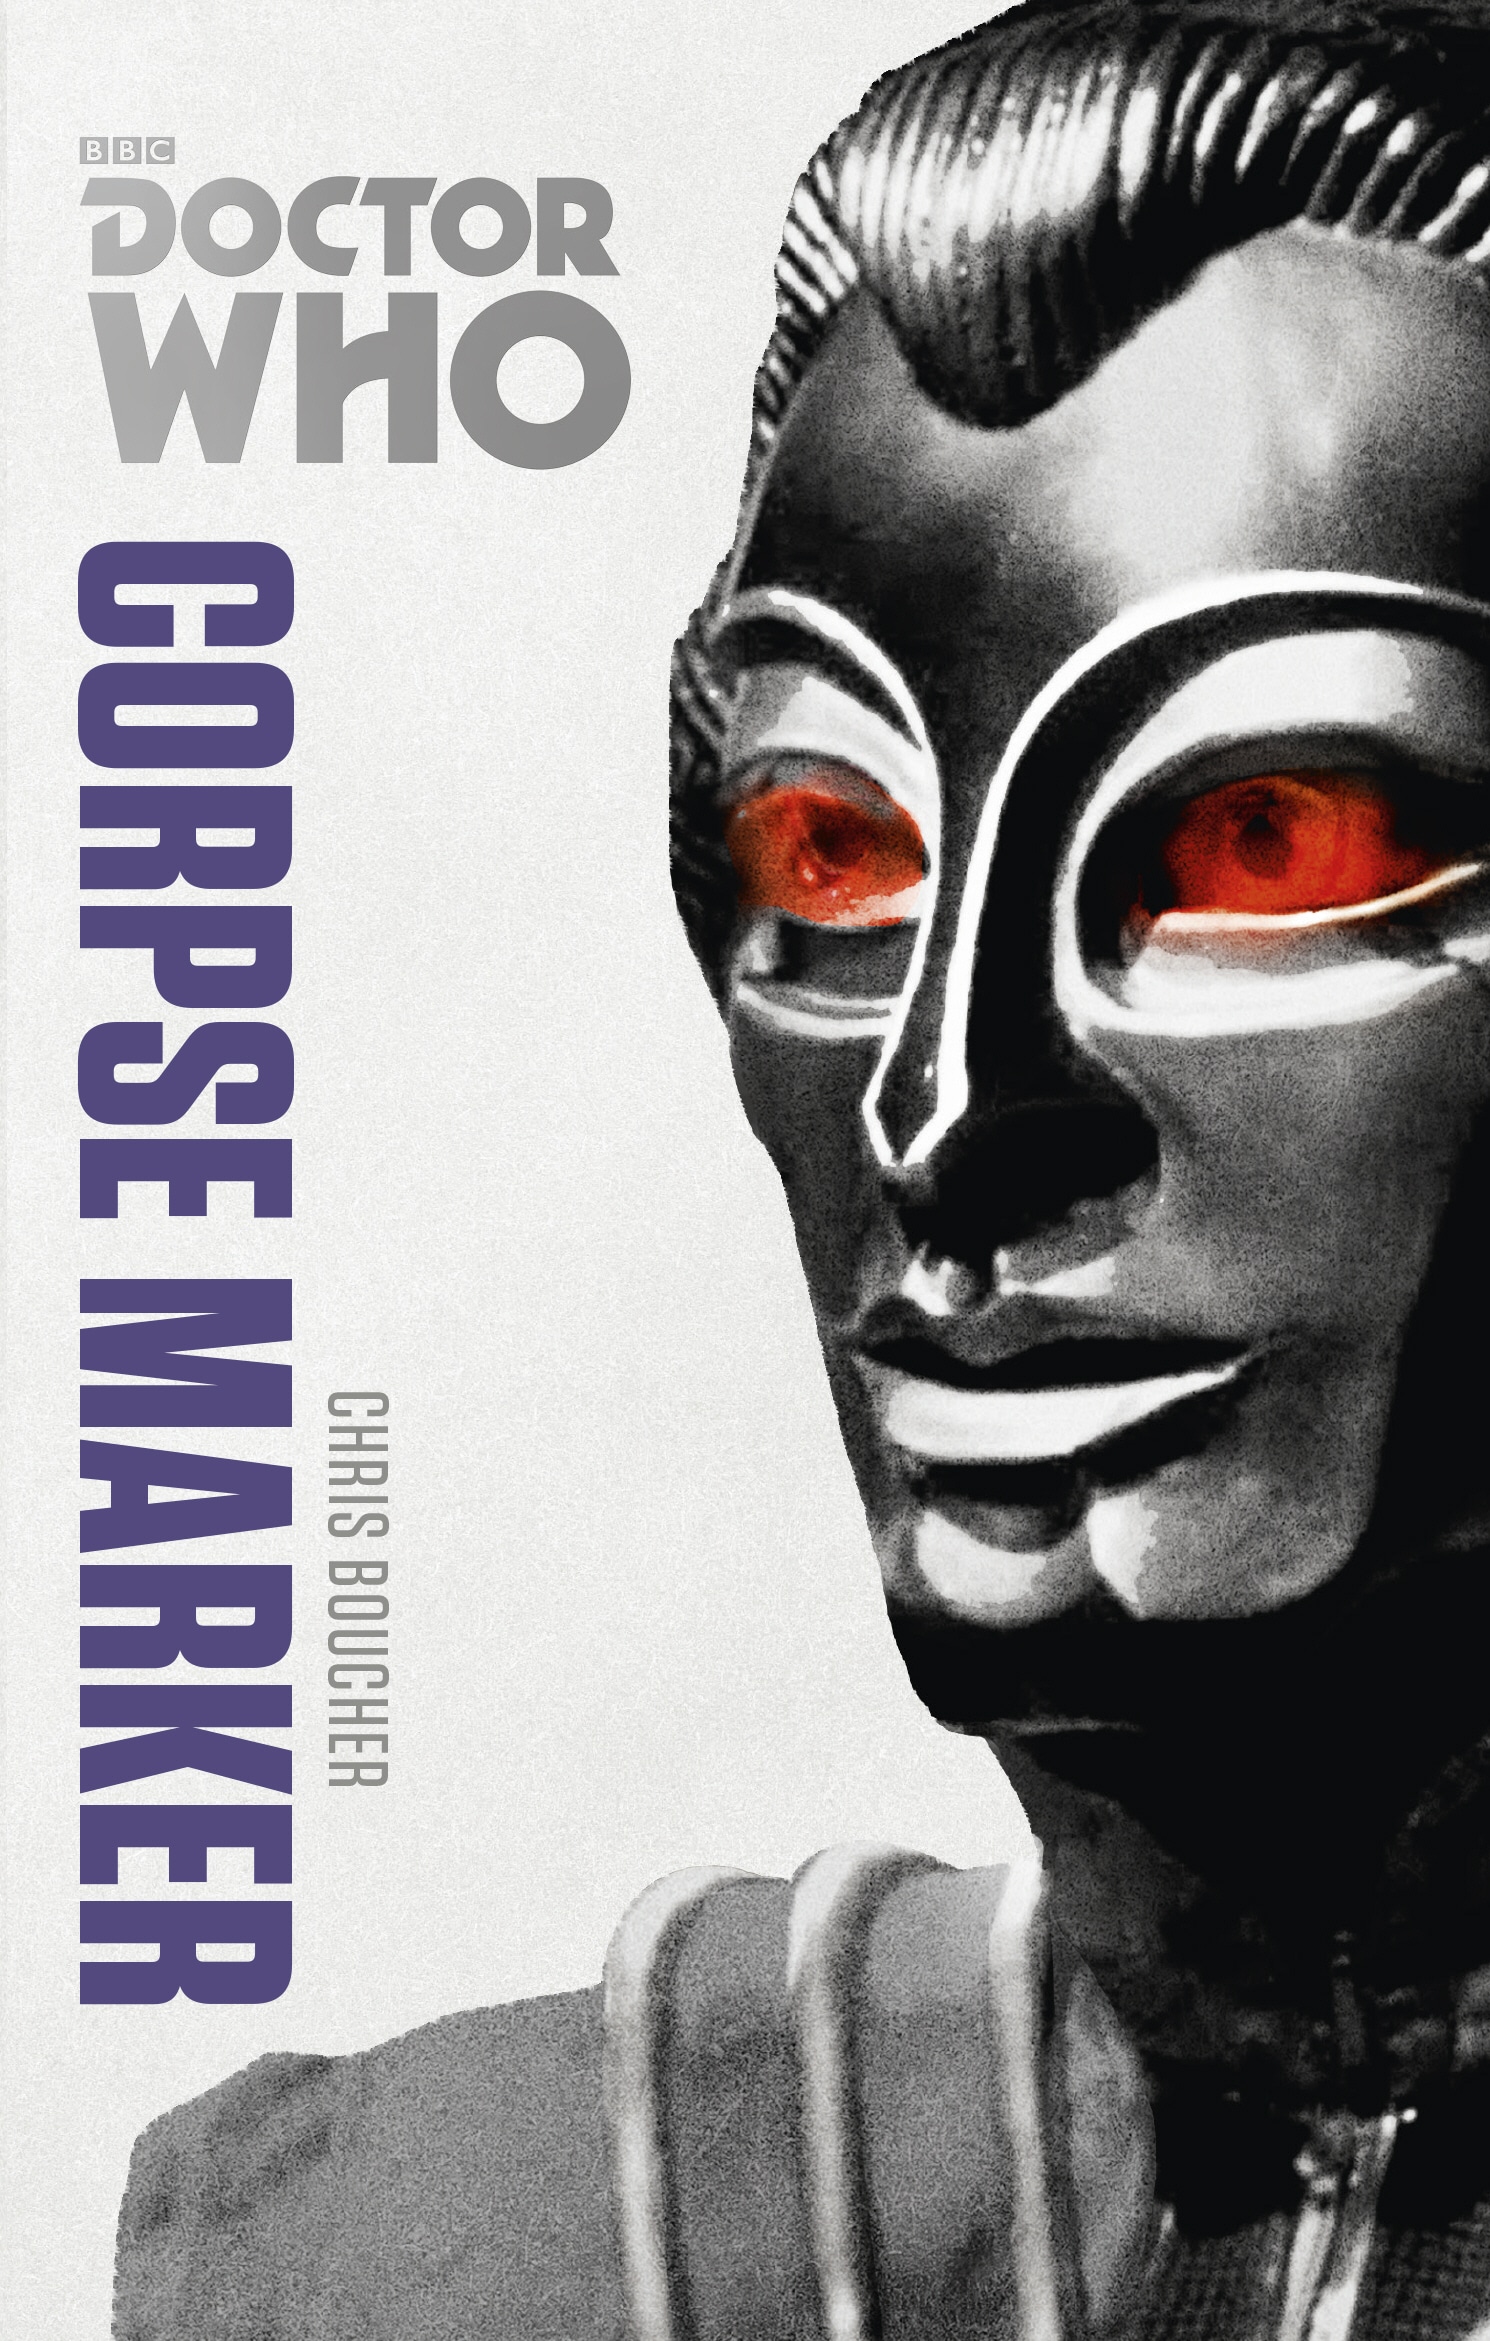 Book “Doctor Who: Corpse Marker” by Chris Boucher — March 6, 2014